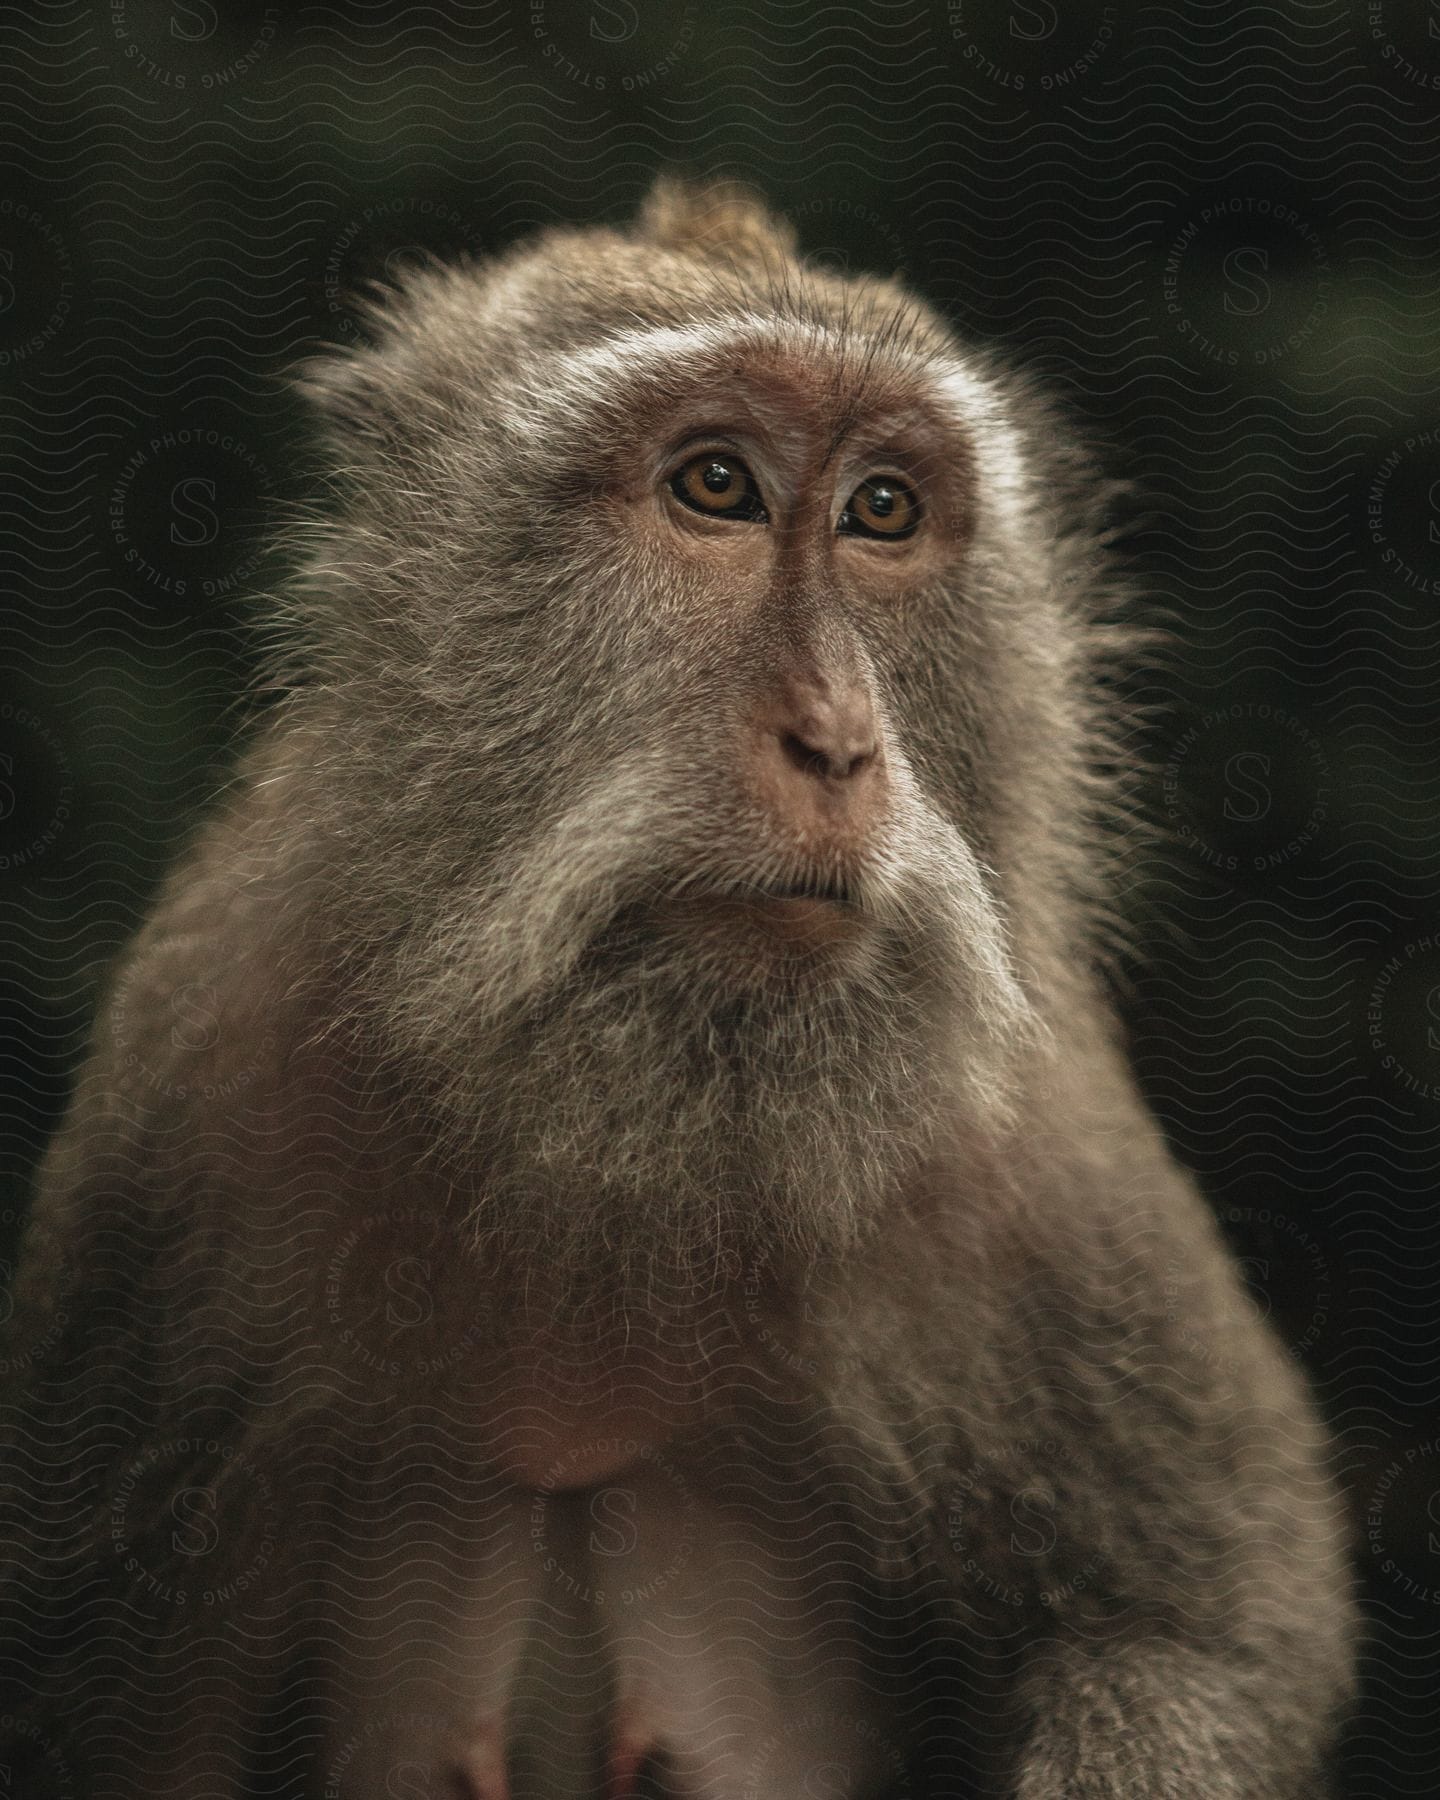 Close-up of a macaque monkey against a dark background.